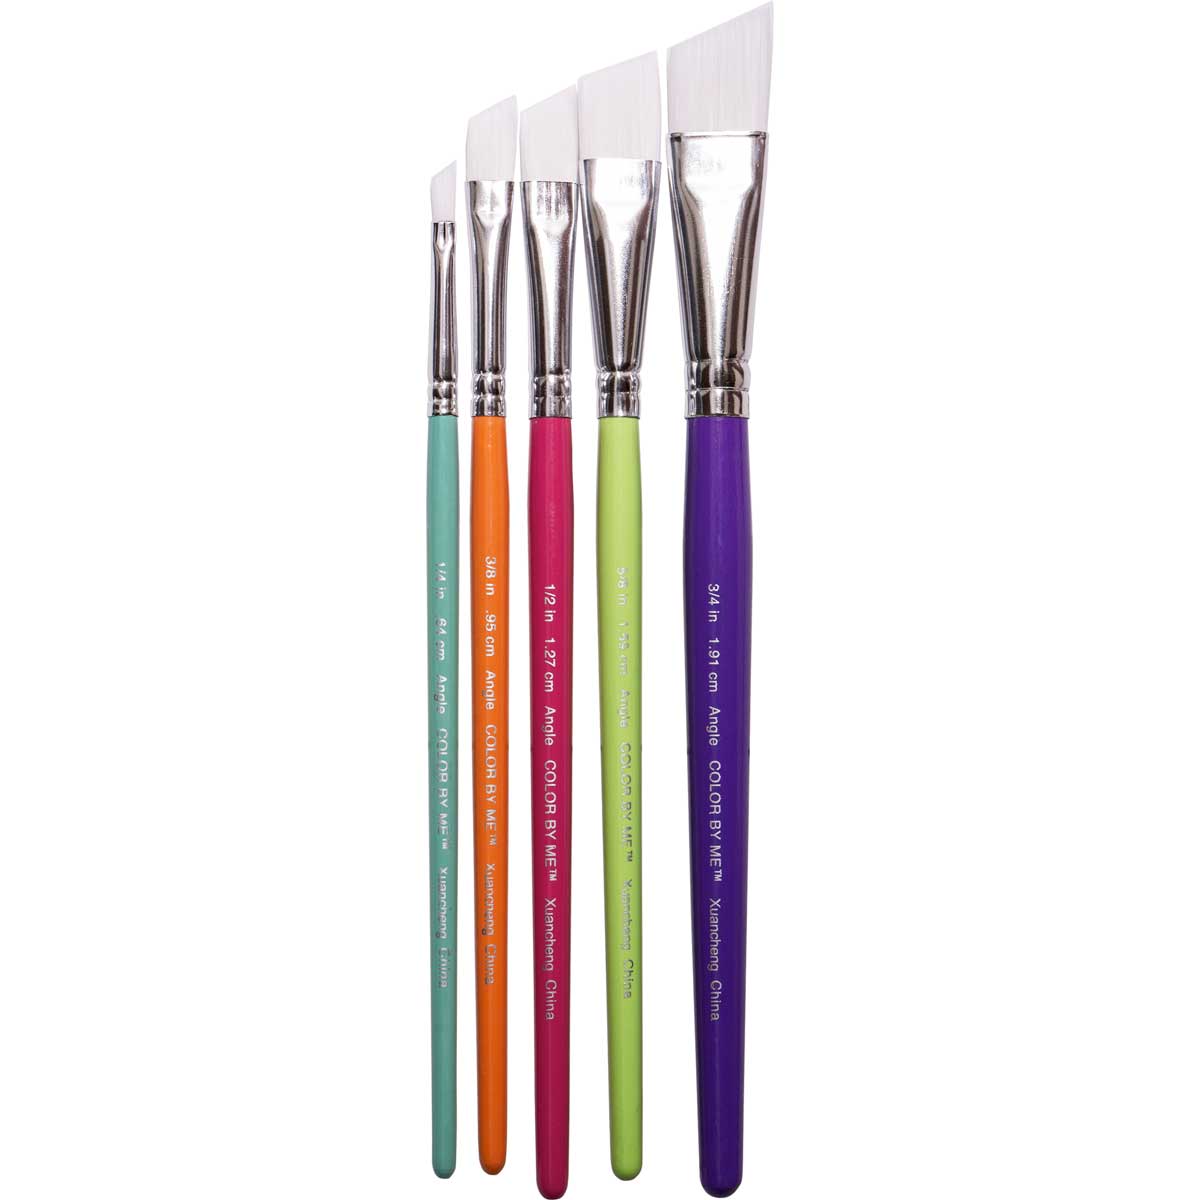 Plaid ® Color By Me™ Brush Sets - Angle Brushes, 5 pc. - 4929E